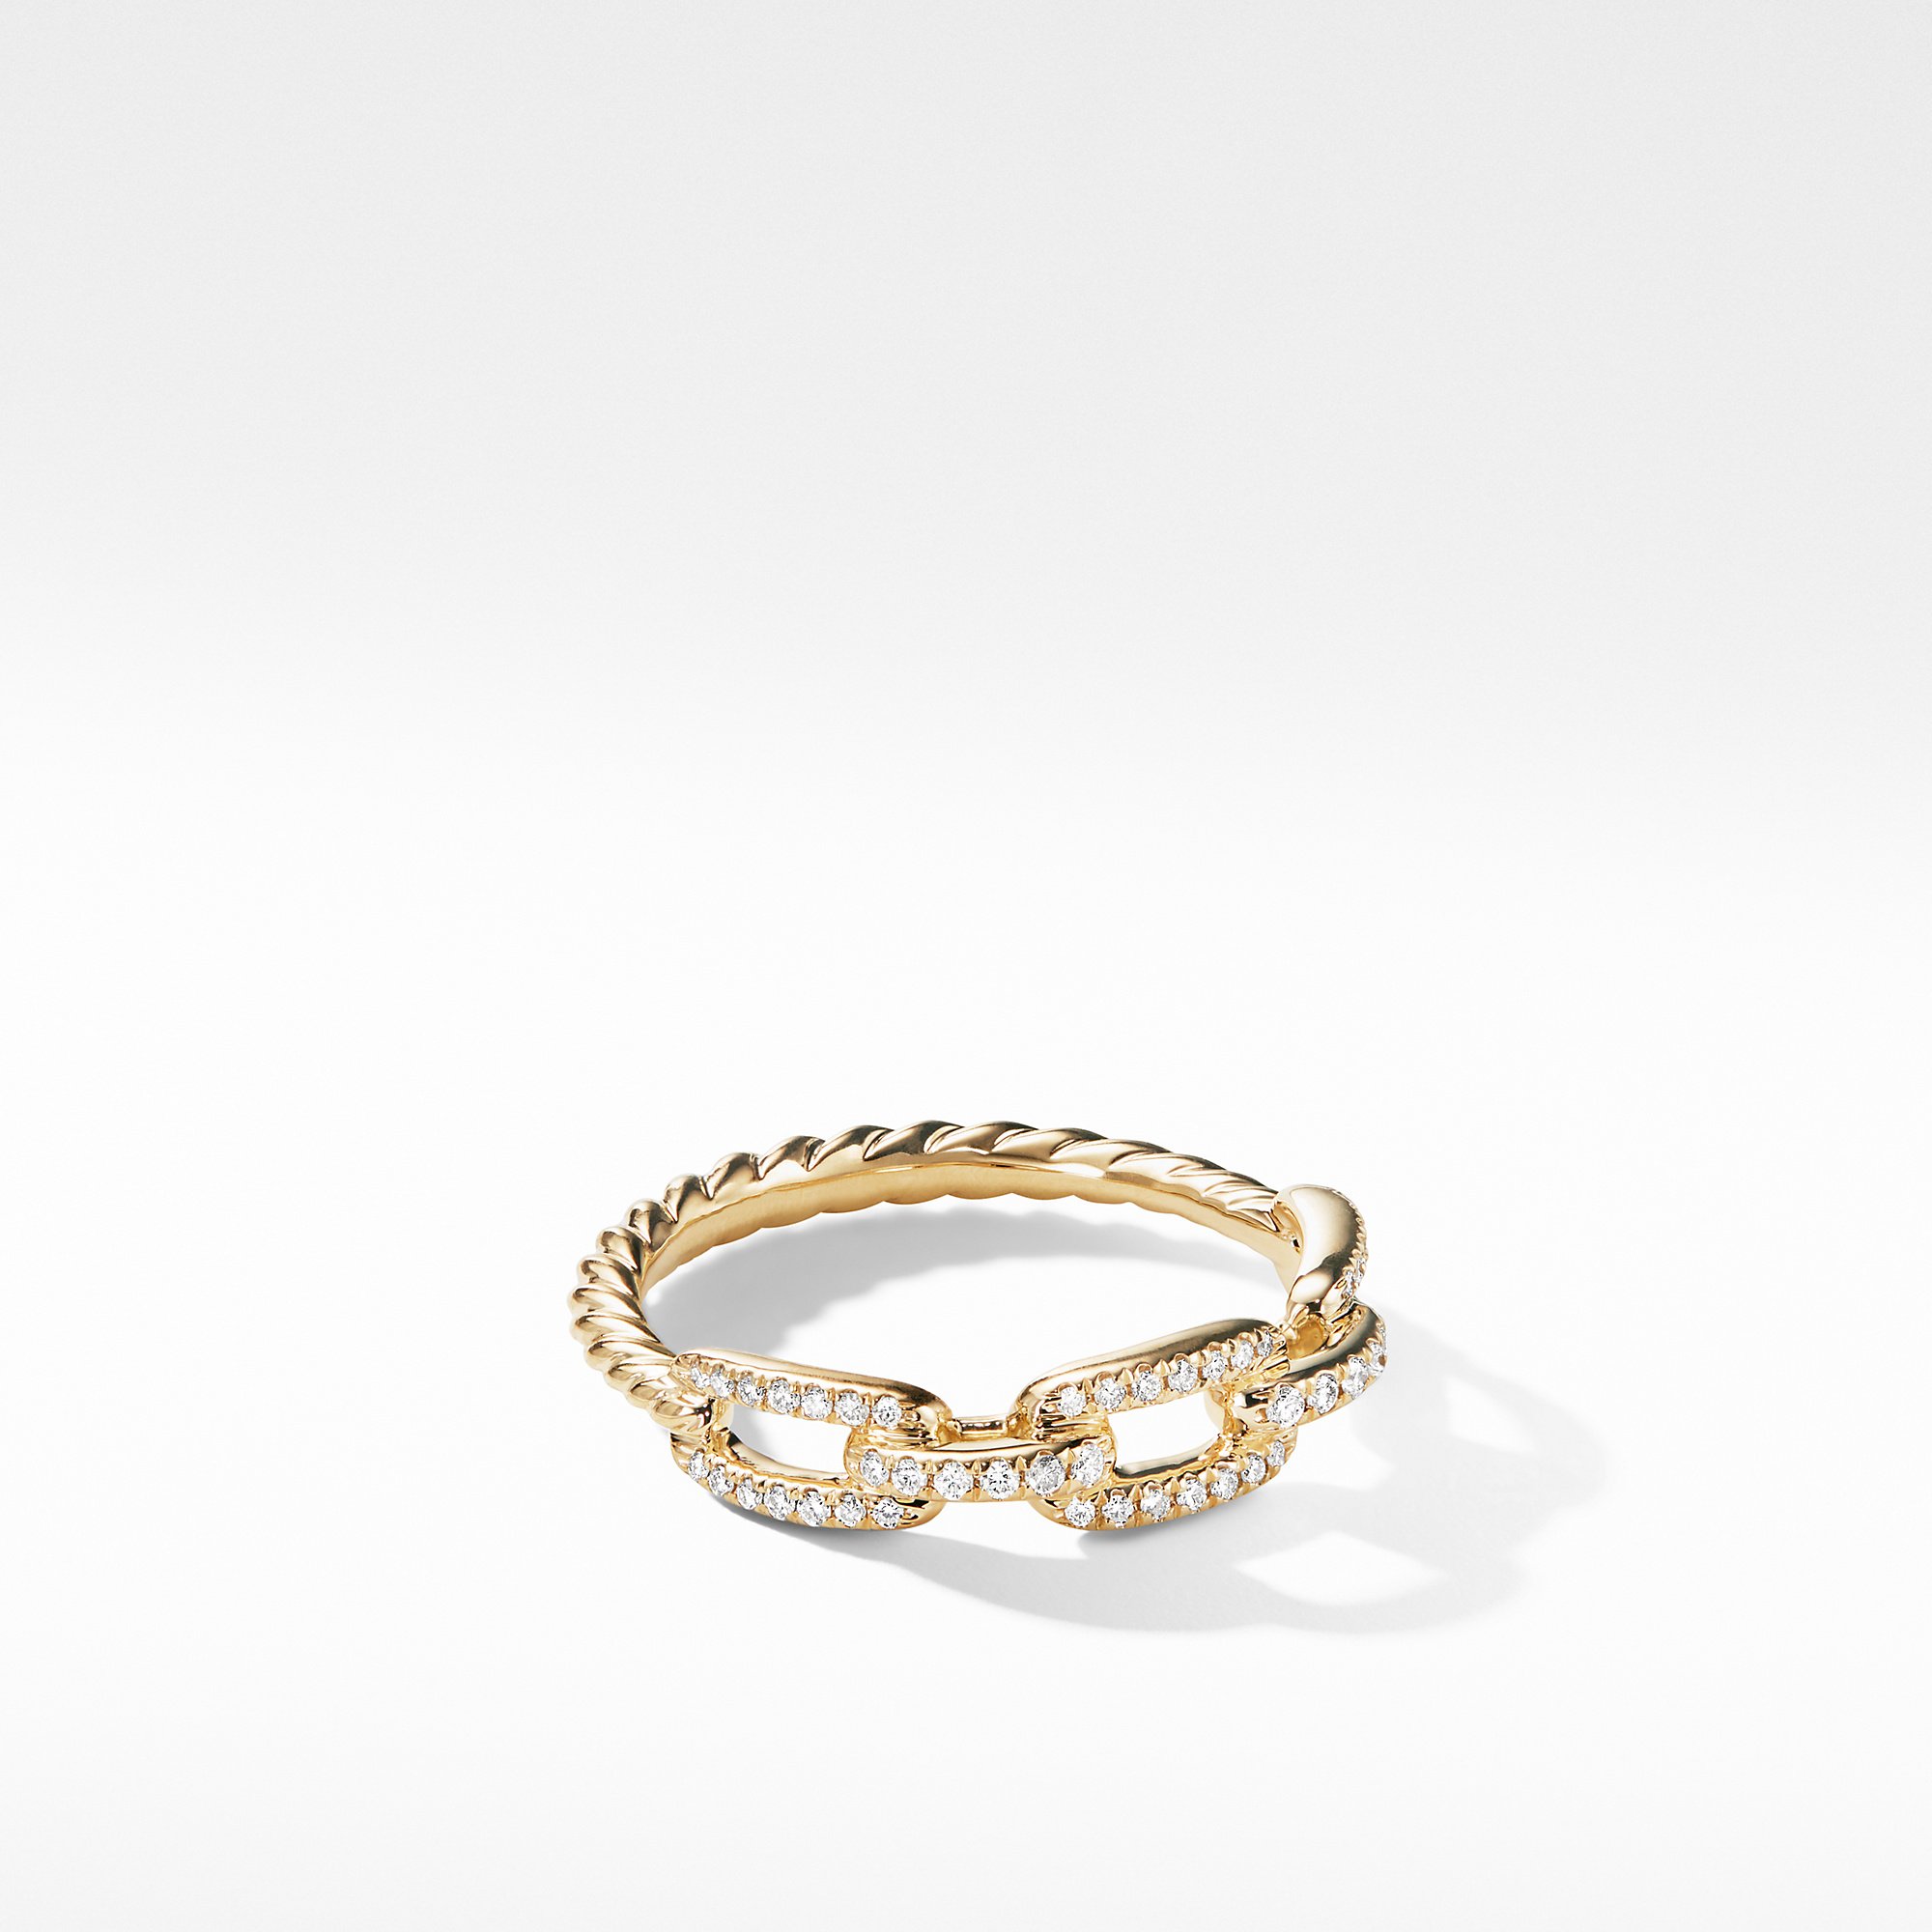 David Yurman Stax Single Row Pave Chain Link Ring with Diamonds in 18K Gold, size 6 0